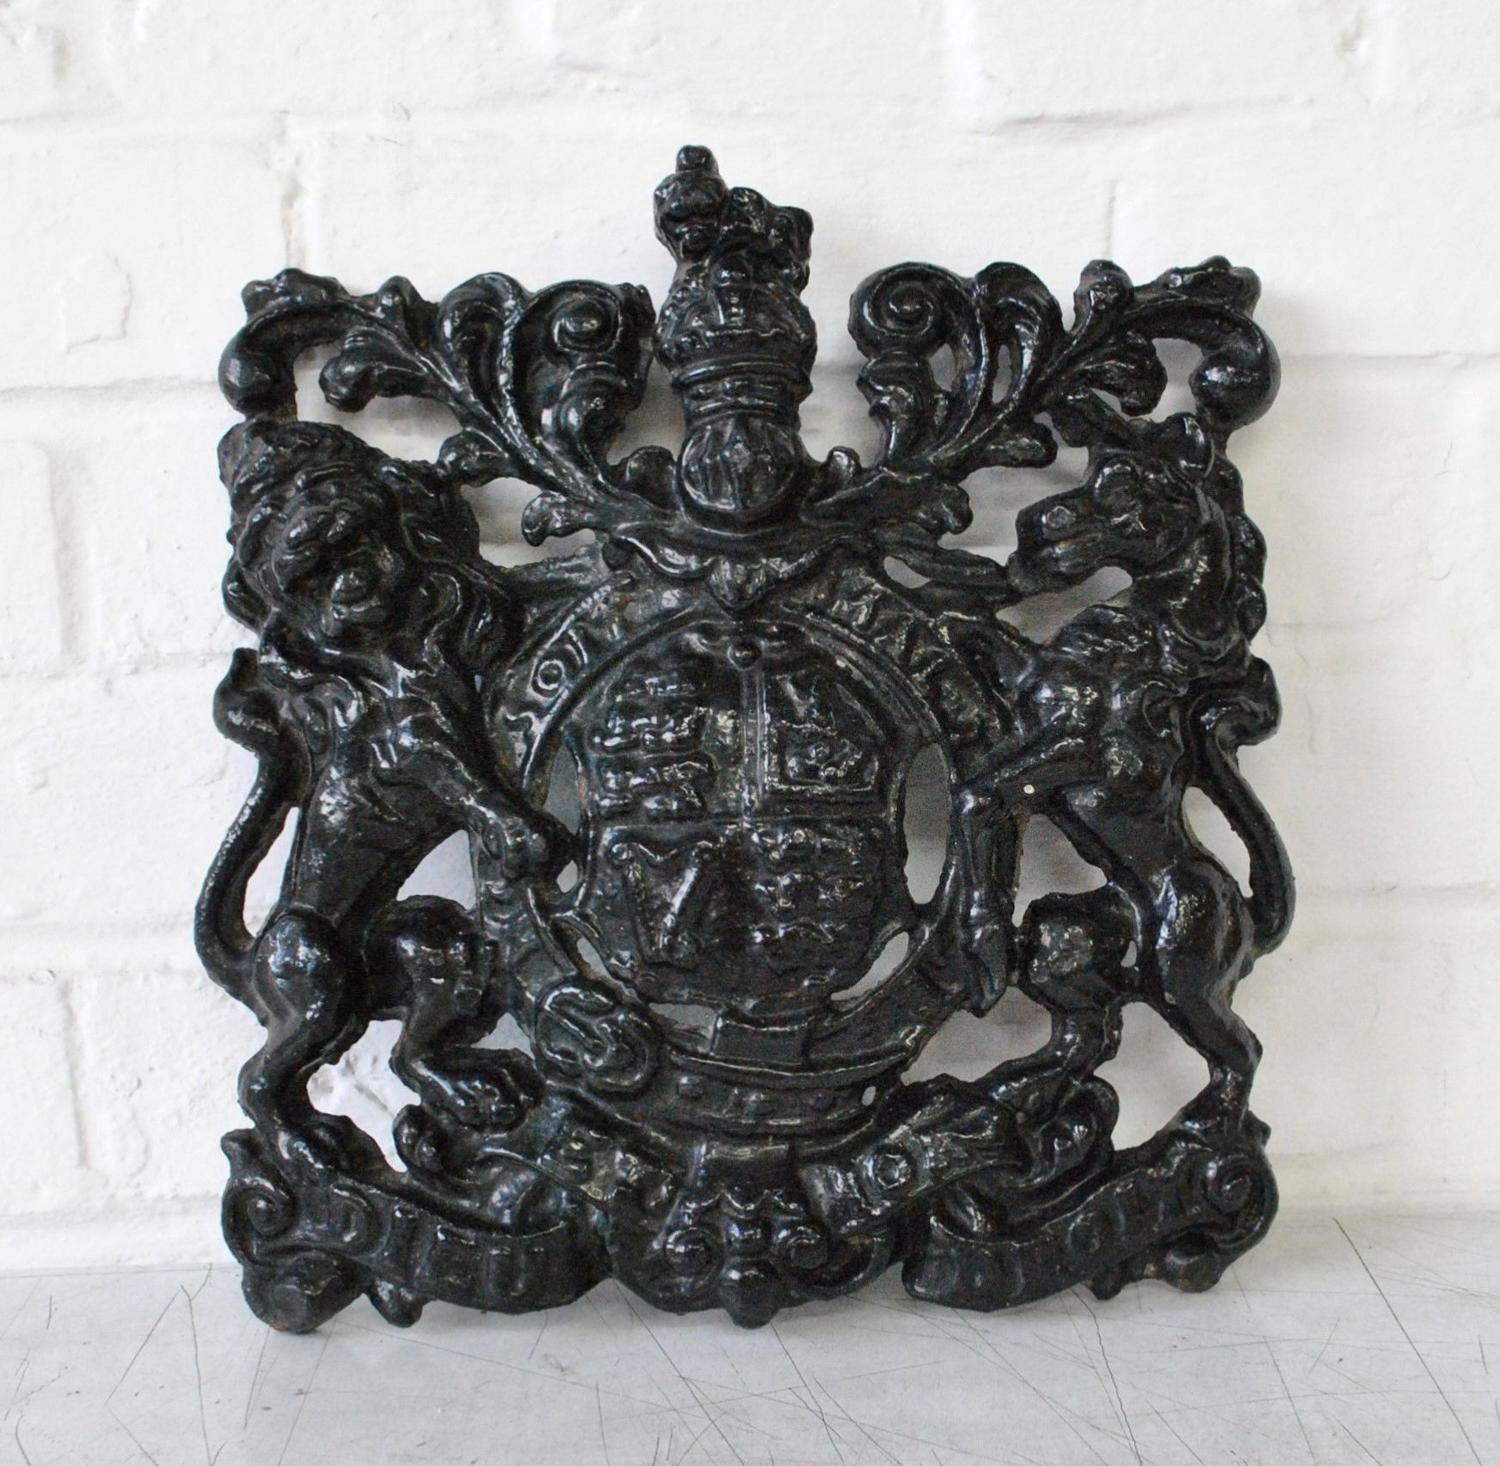 Cast Iron English Royal Coat of Arms